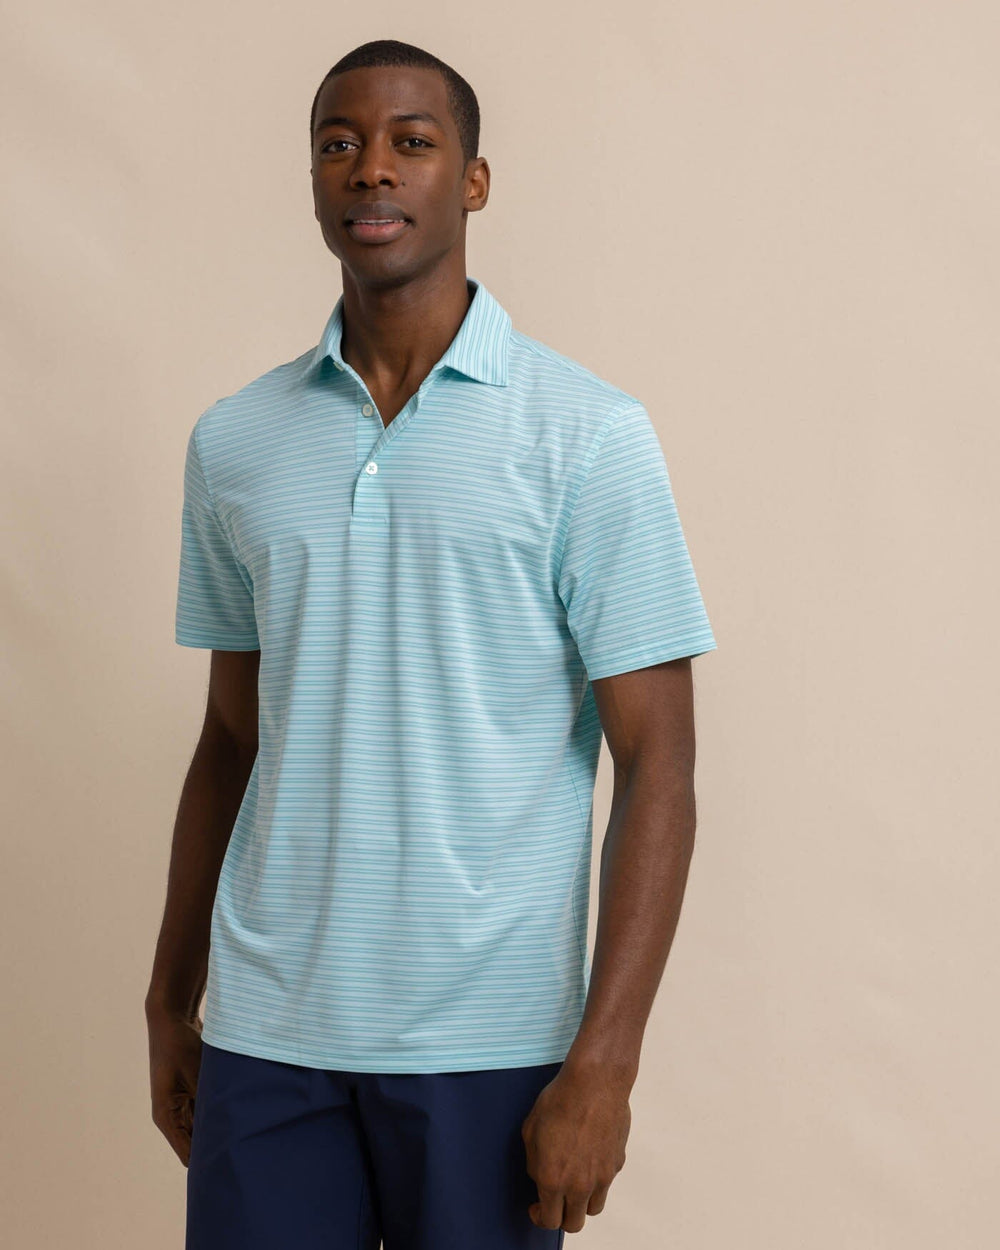 The front view of the Southern Tide Driver Baywoods Stripe Polo by Southern Tide - Wake Blue